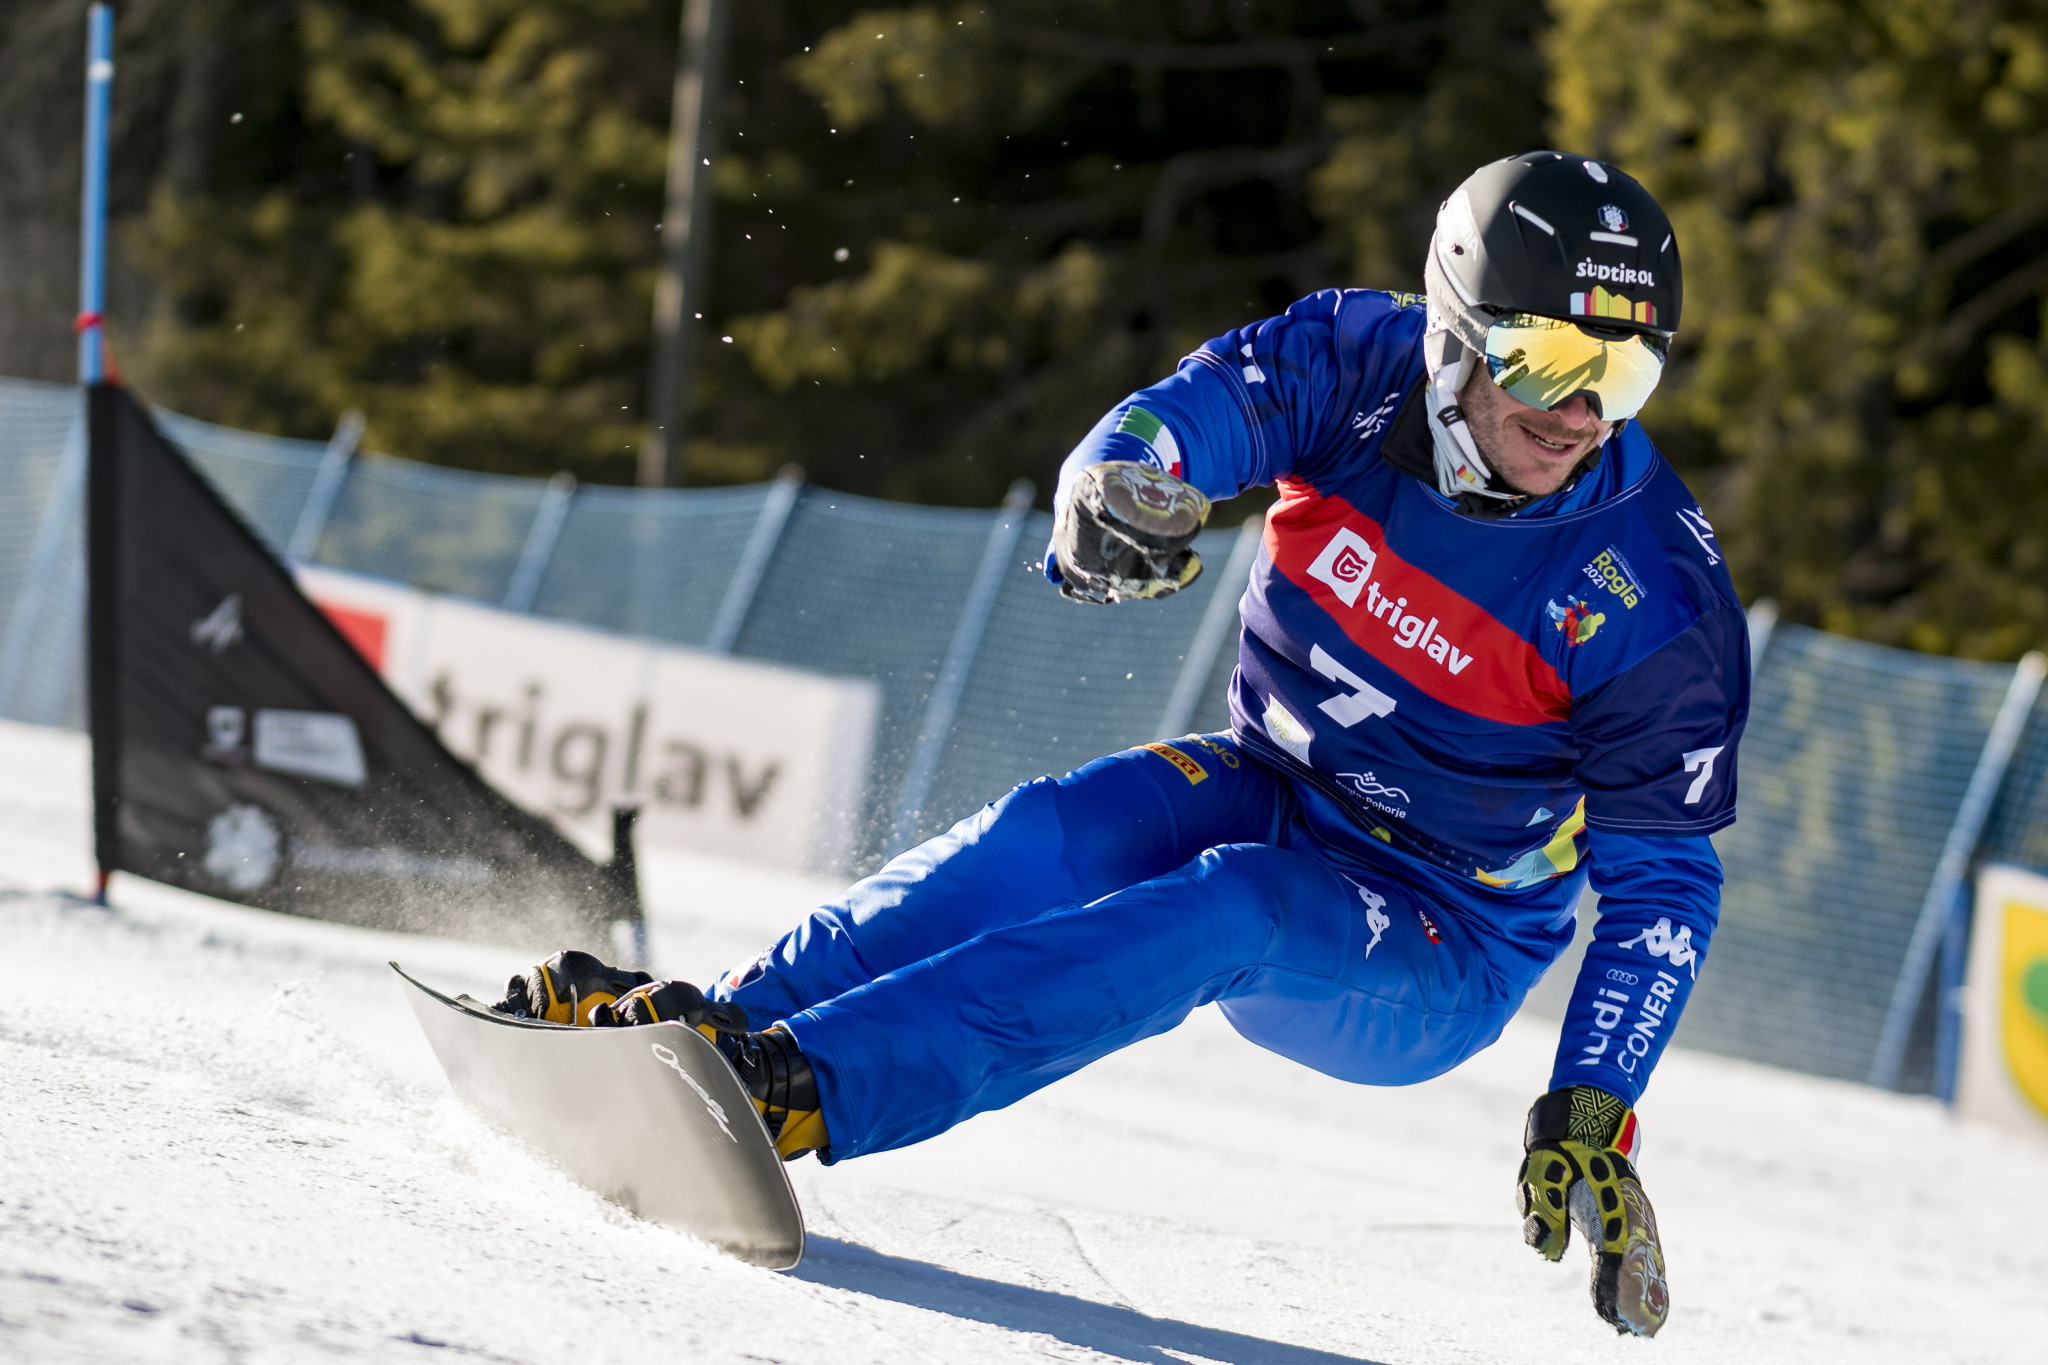 Italy's Aaron March won the men's parallel overall event in the 2020/2021 season ©Getty Images